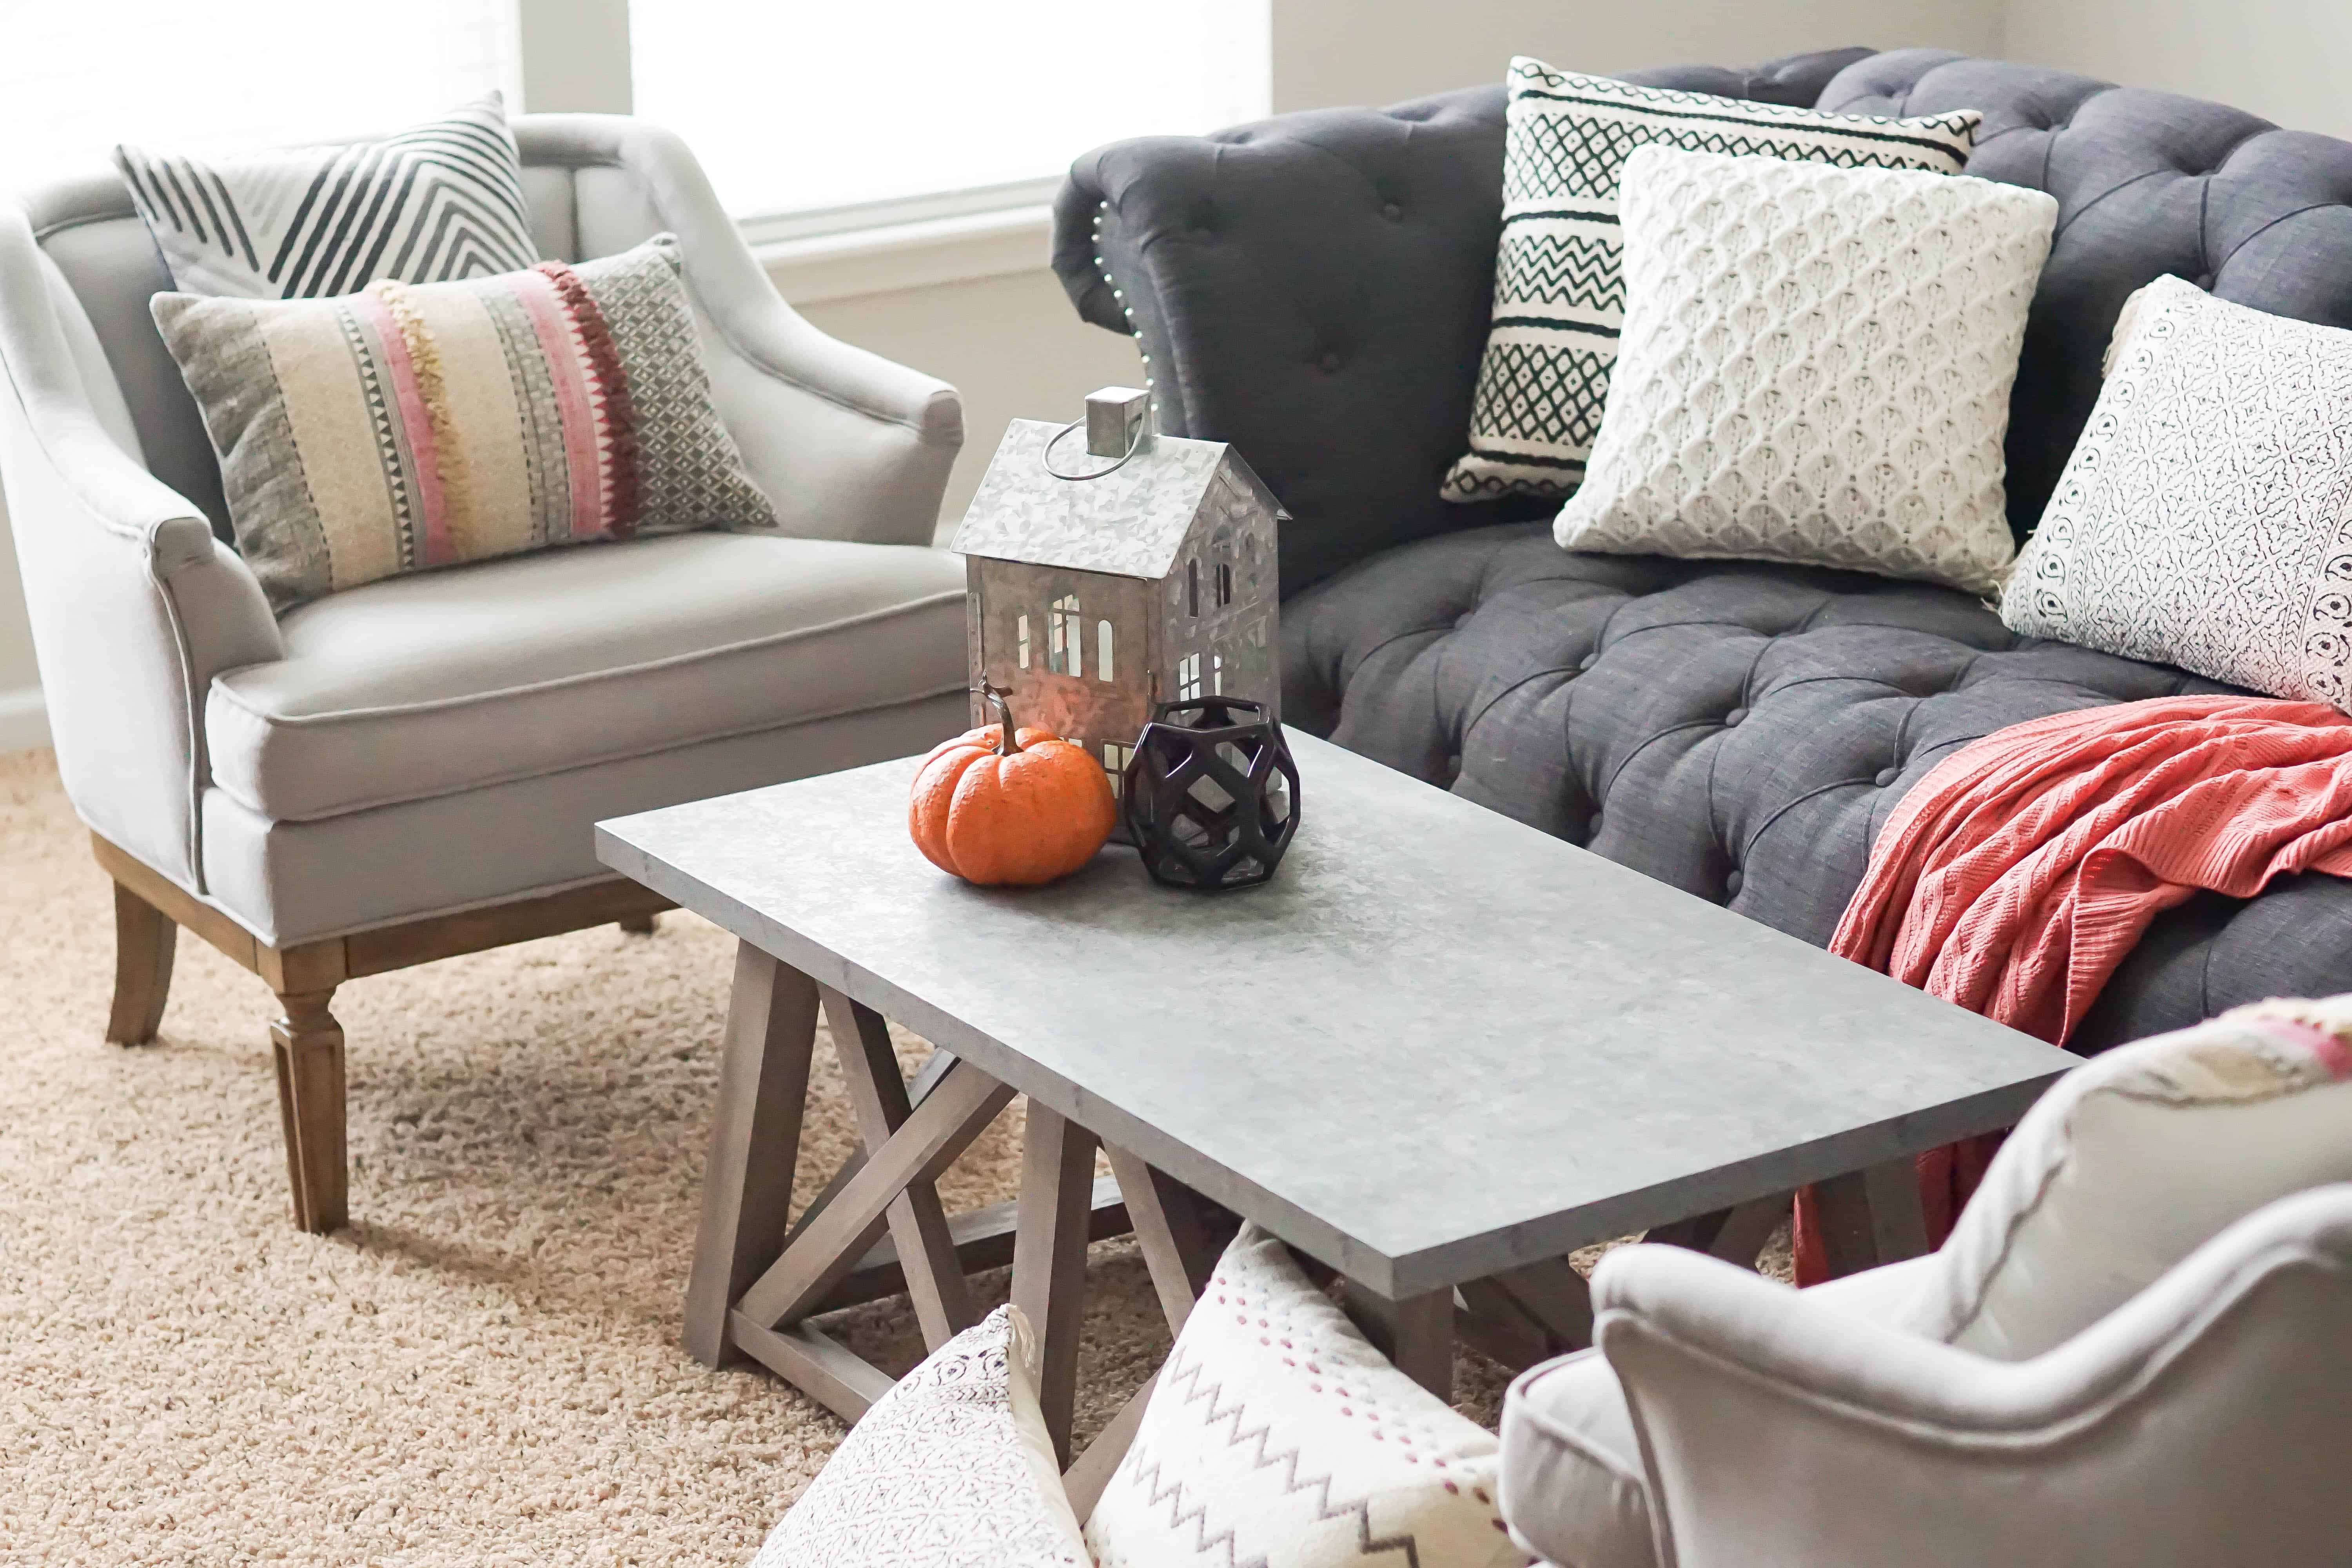 Fall Family Room Update 01020 | Fall Family Room Update | 24 | Farmhouse Fall Centerpiece